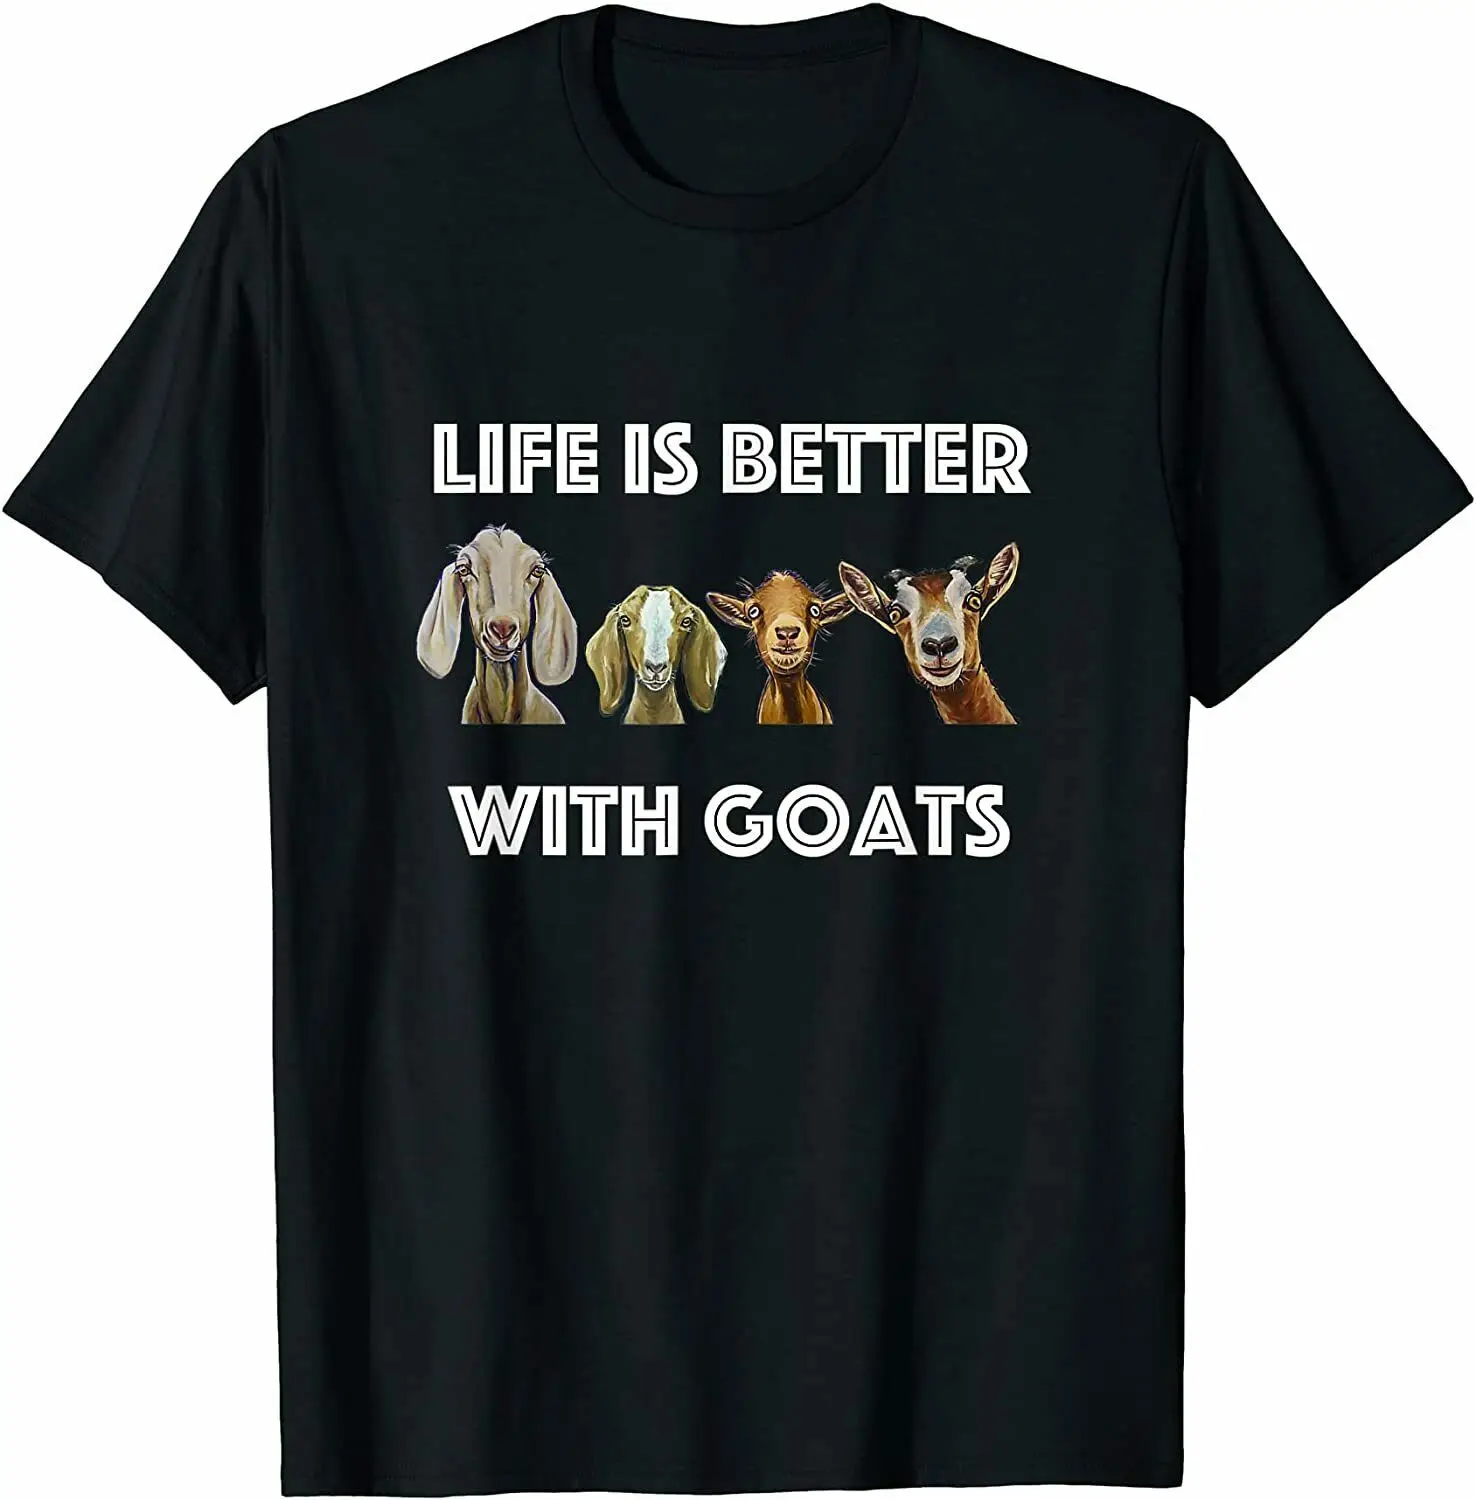 

Funny Printed Tees Life Is Better With Goats, Goat Lover T-Shirt Summer Cotton Short Sleeve O-Neck Mens T Shirt New S-3XL